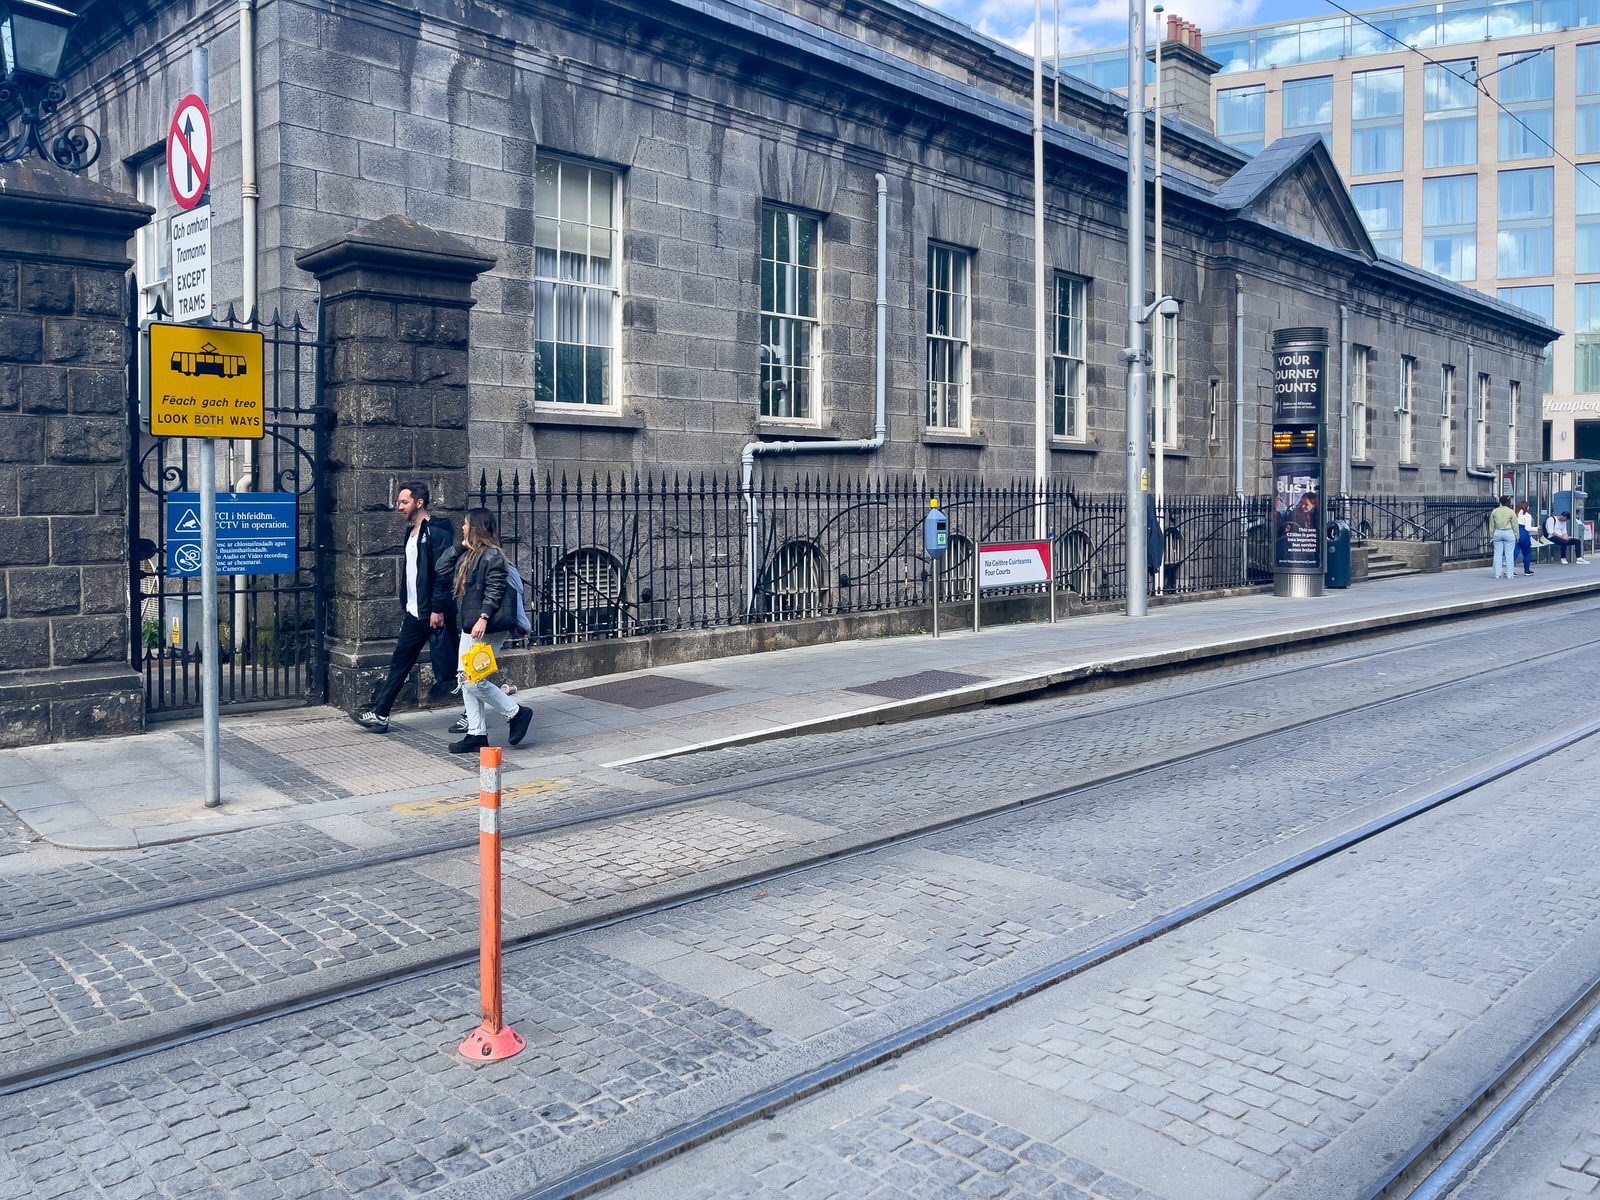 THE LUAS FOUR COURTS TRAM STOP [THERE IS MUCH TO BE SEEN HERE]-234115-1